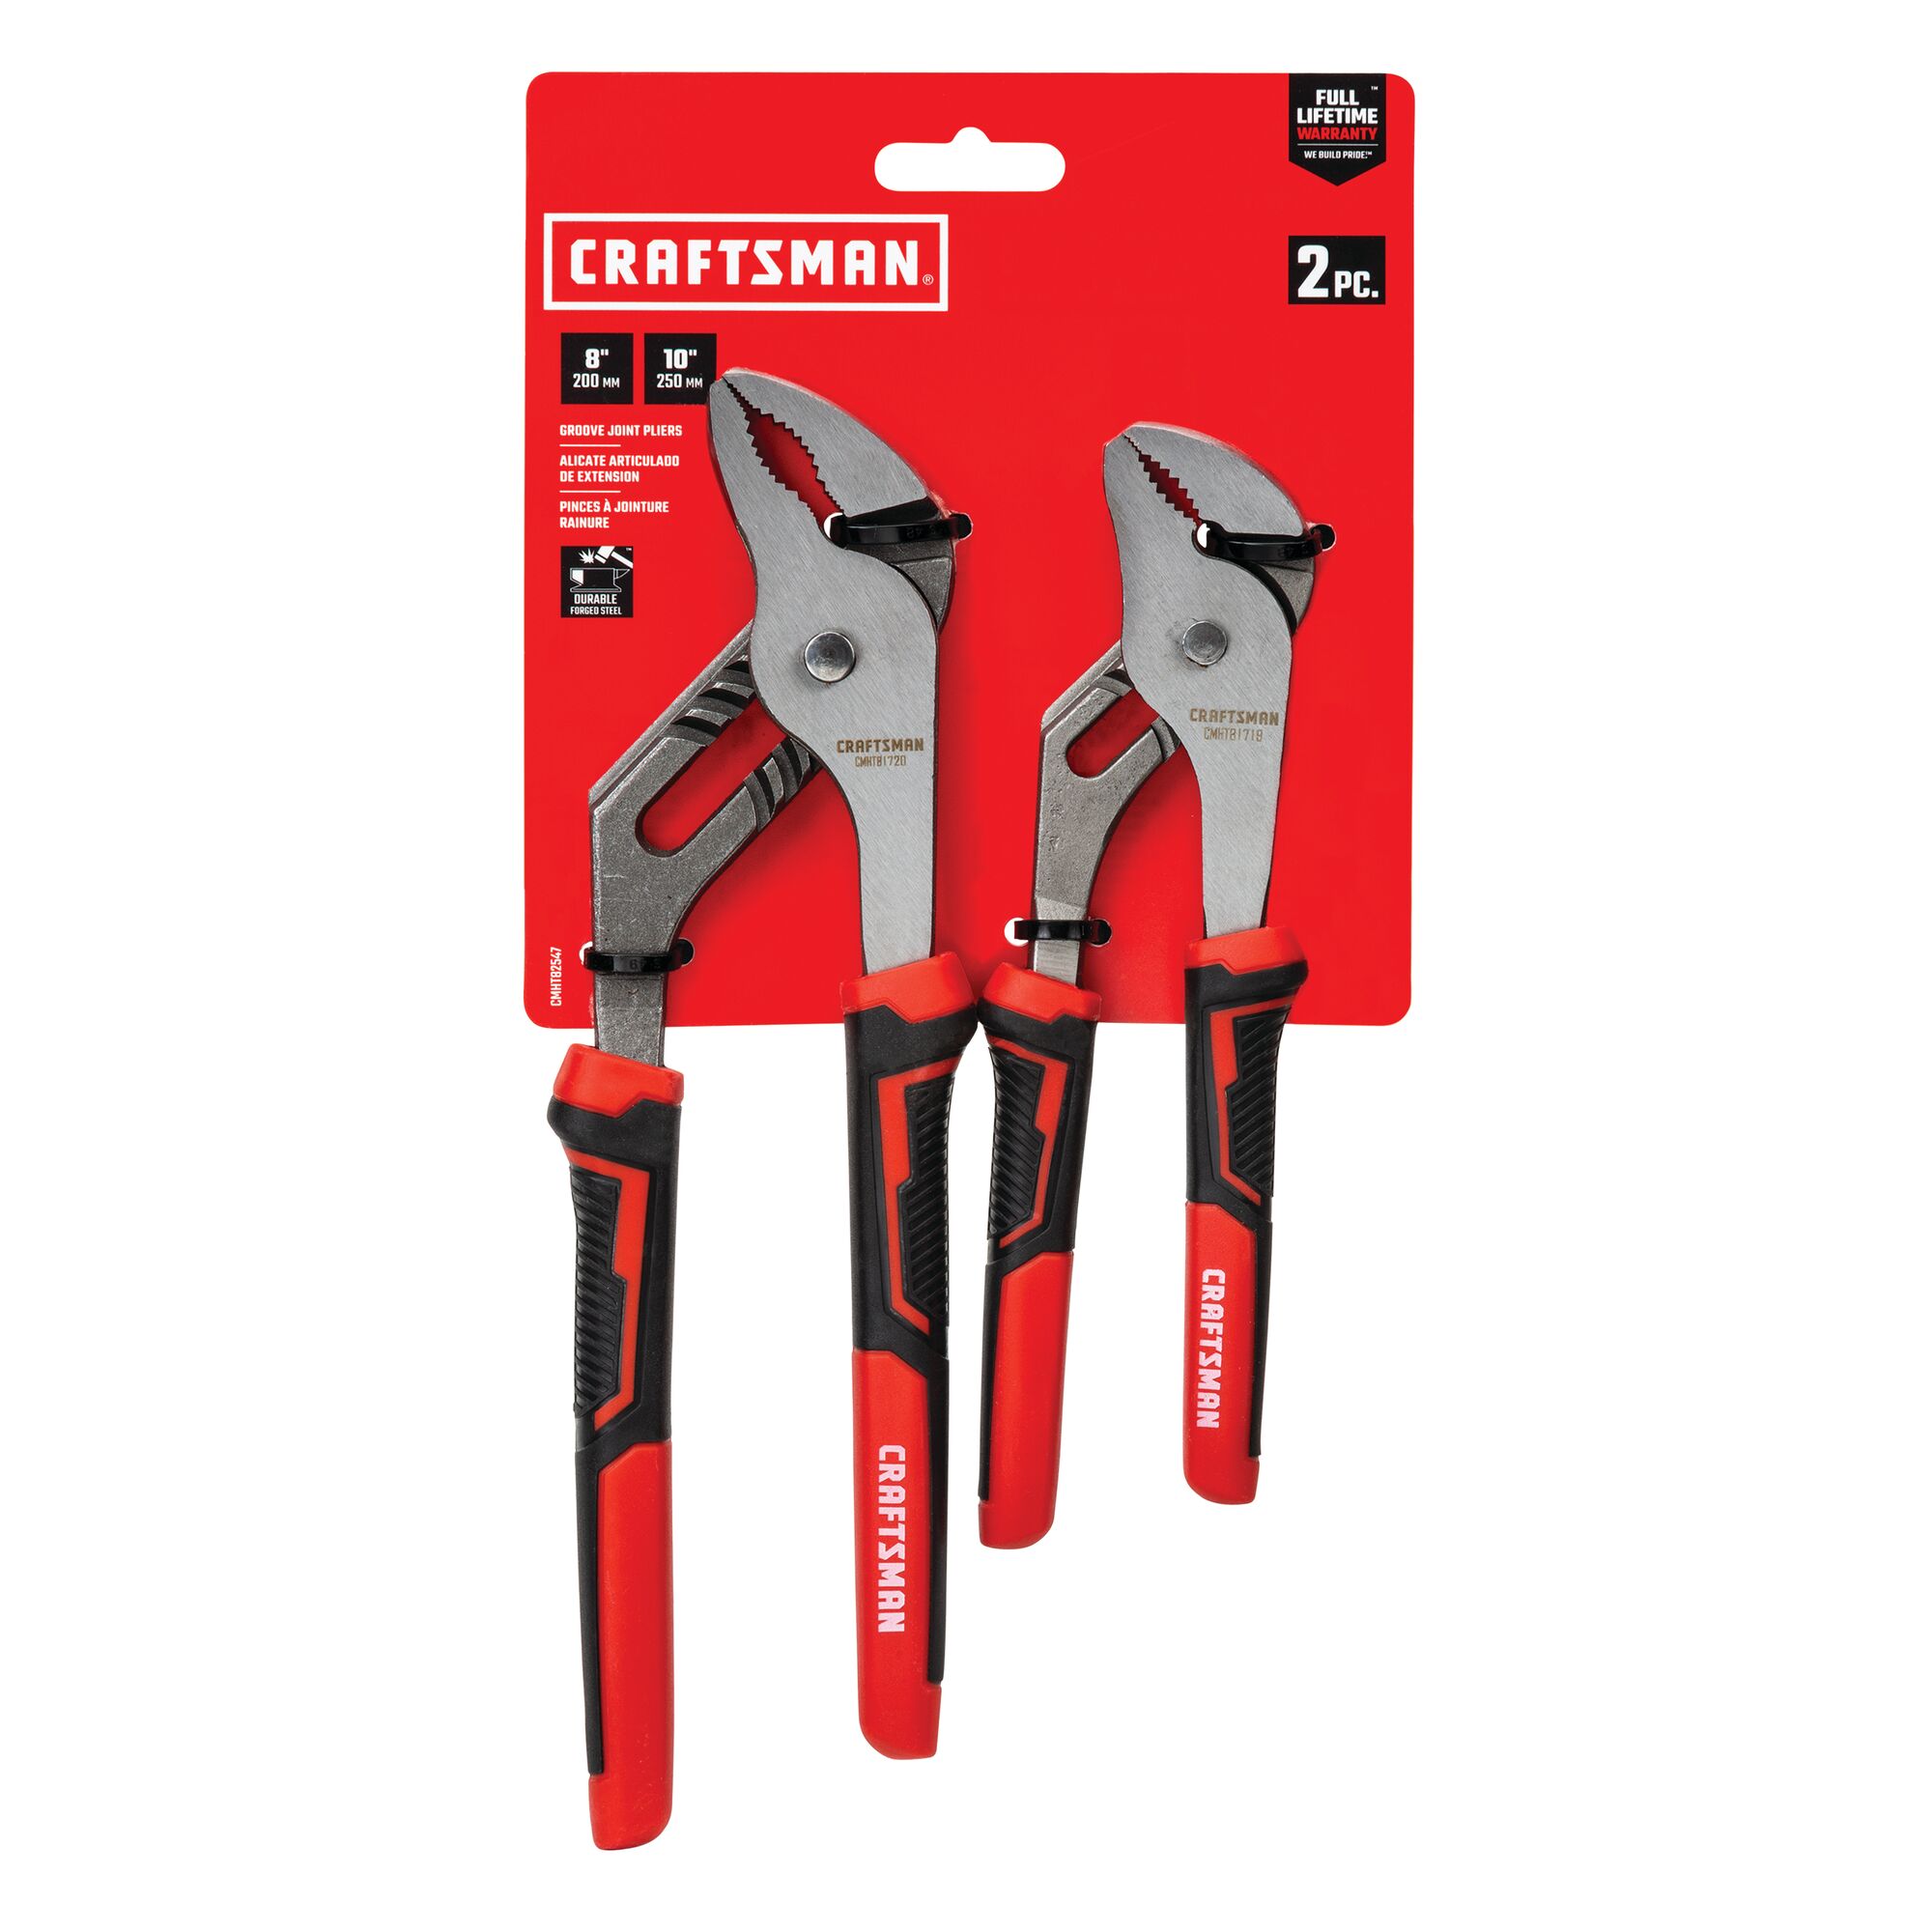 View of CRAFTSMAN Pliers: Joint packaging